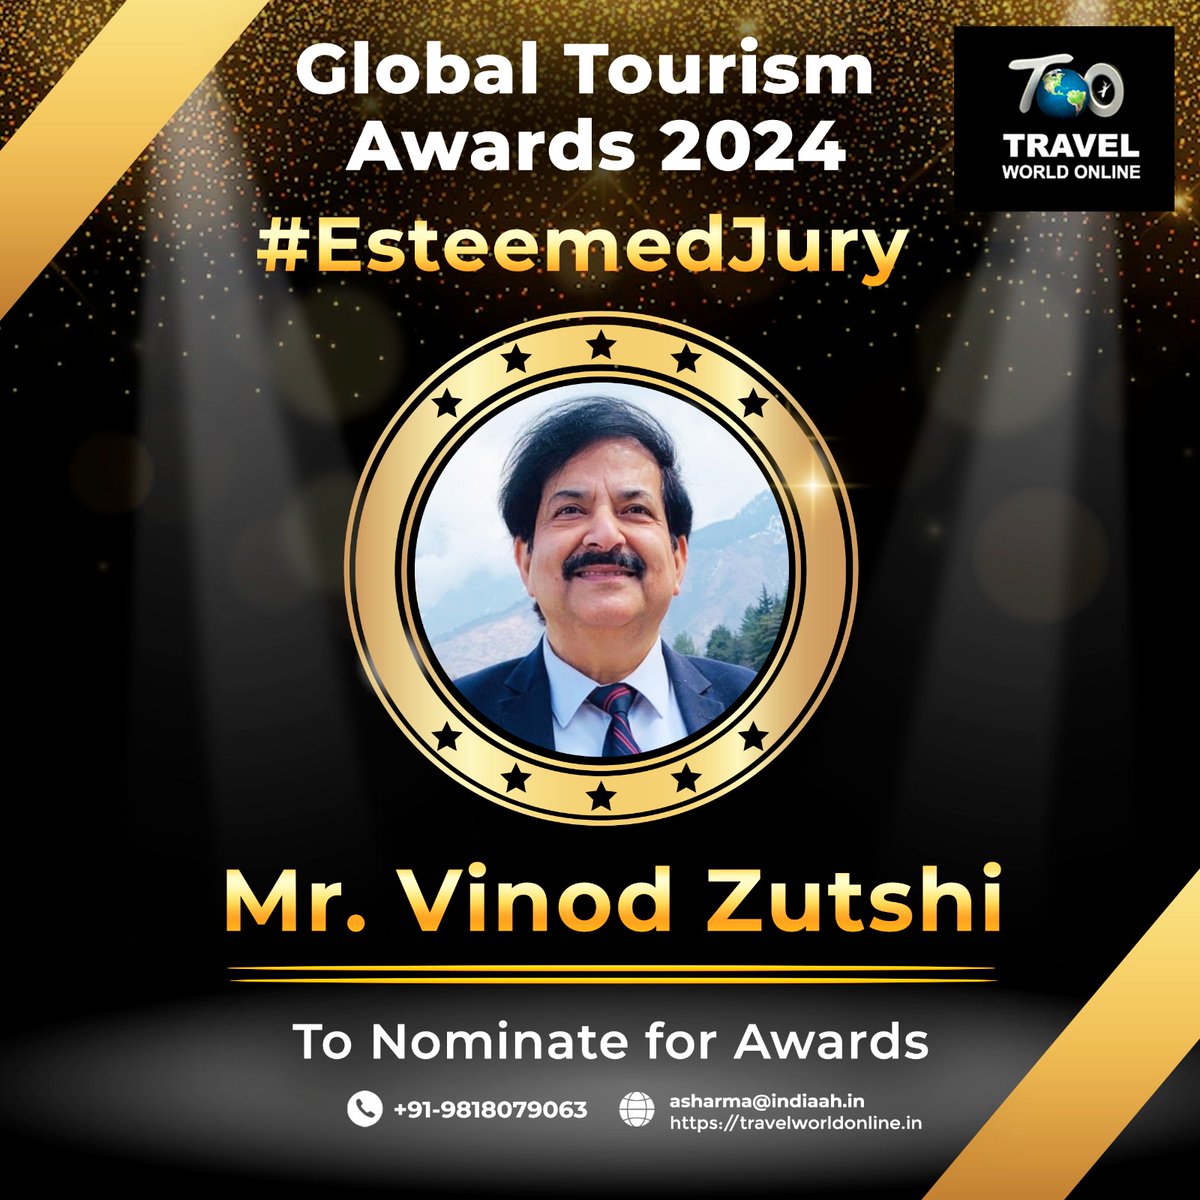 We are pleased to announce our esteemed jury for the upcoming award show

Save the date
02- Aug- 2024

#travelworldonline #travel #tourism #jurymember #awardshow #vinodzutshi #excitingtimes